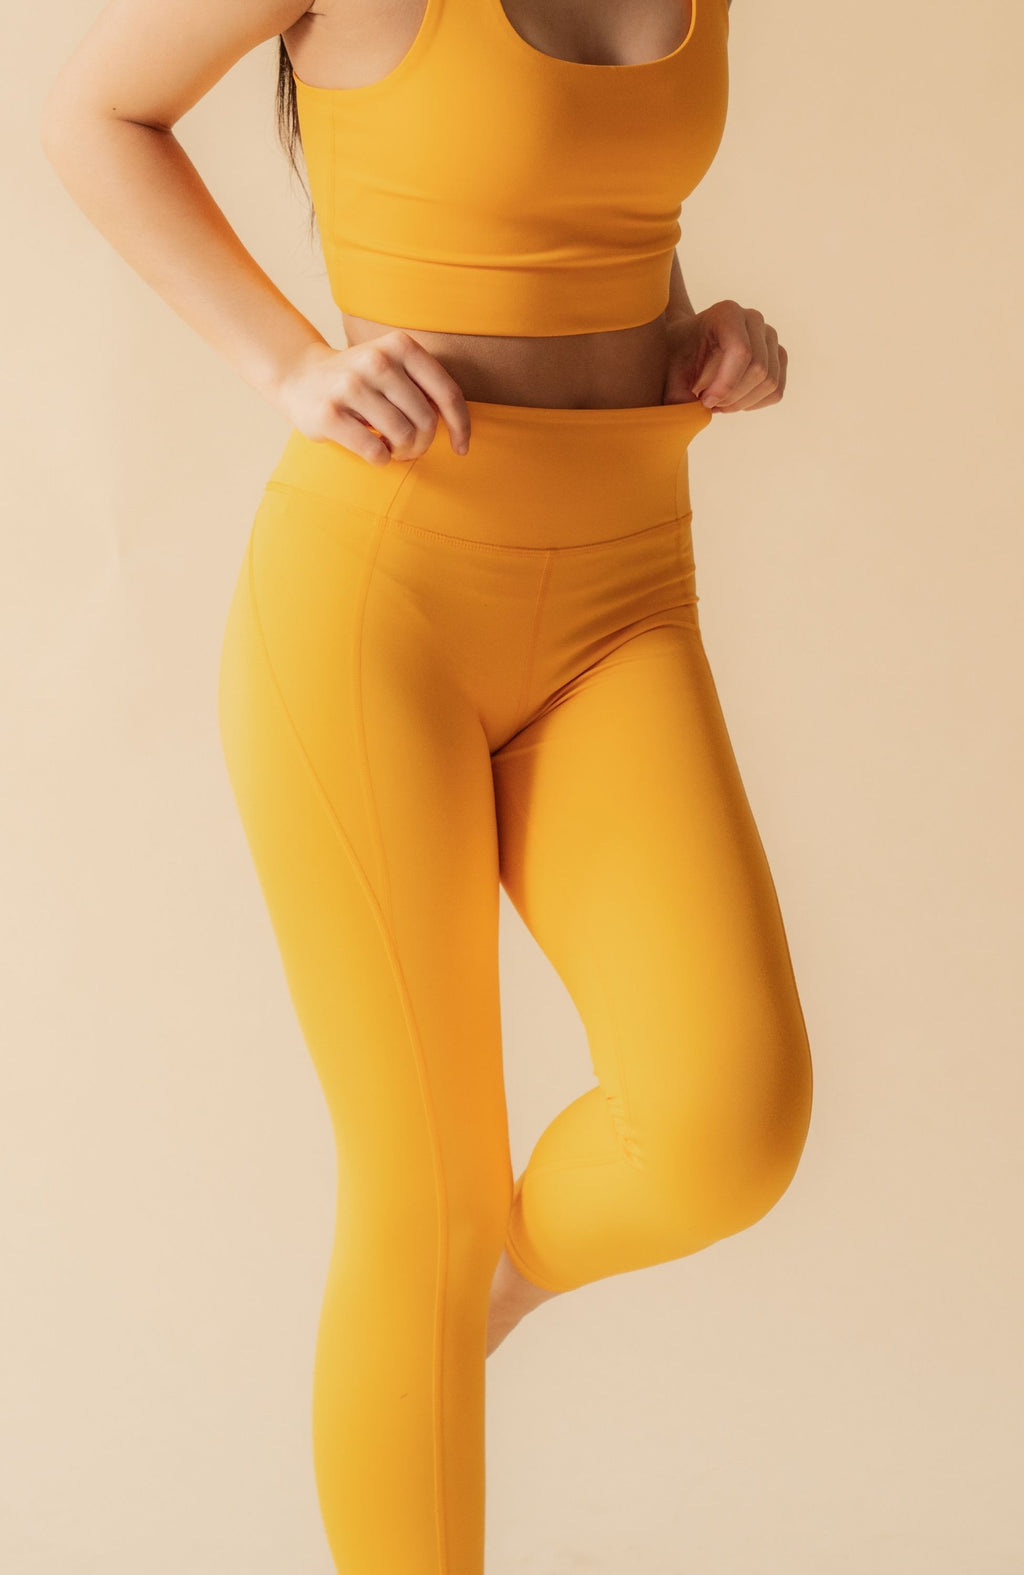 Ethical sustainable yellow girlfriend collective high rise legging